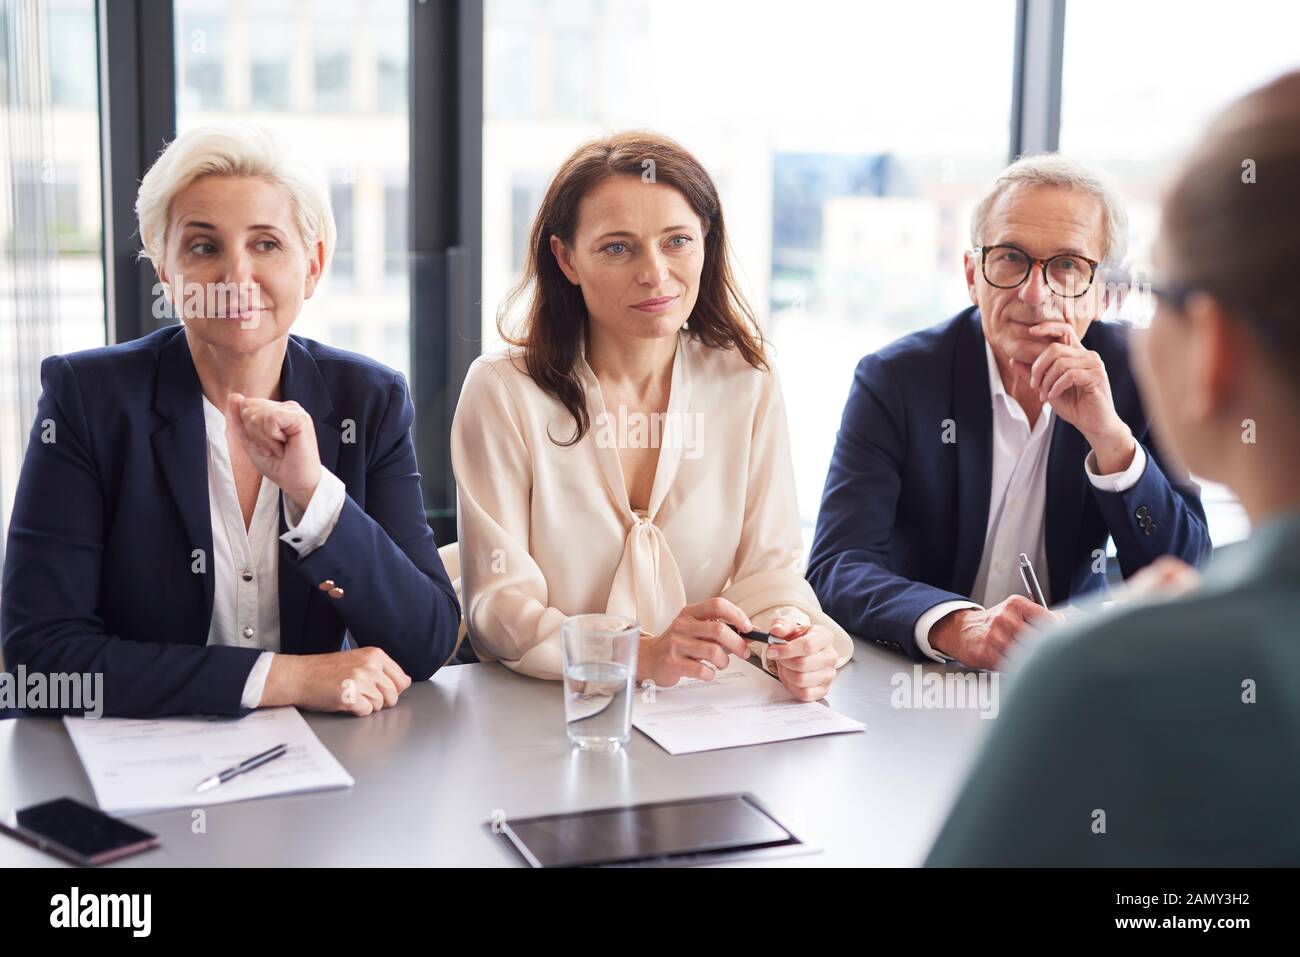 Business people having a conversation at conference table Stock Photo